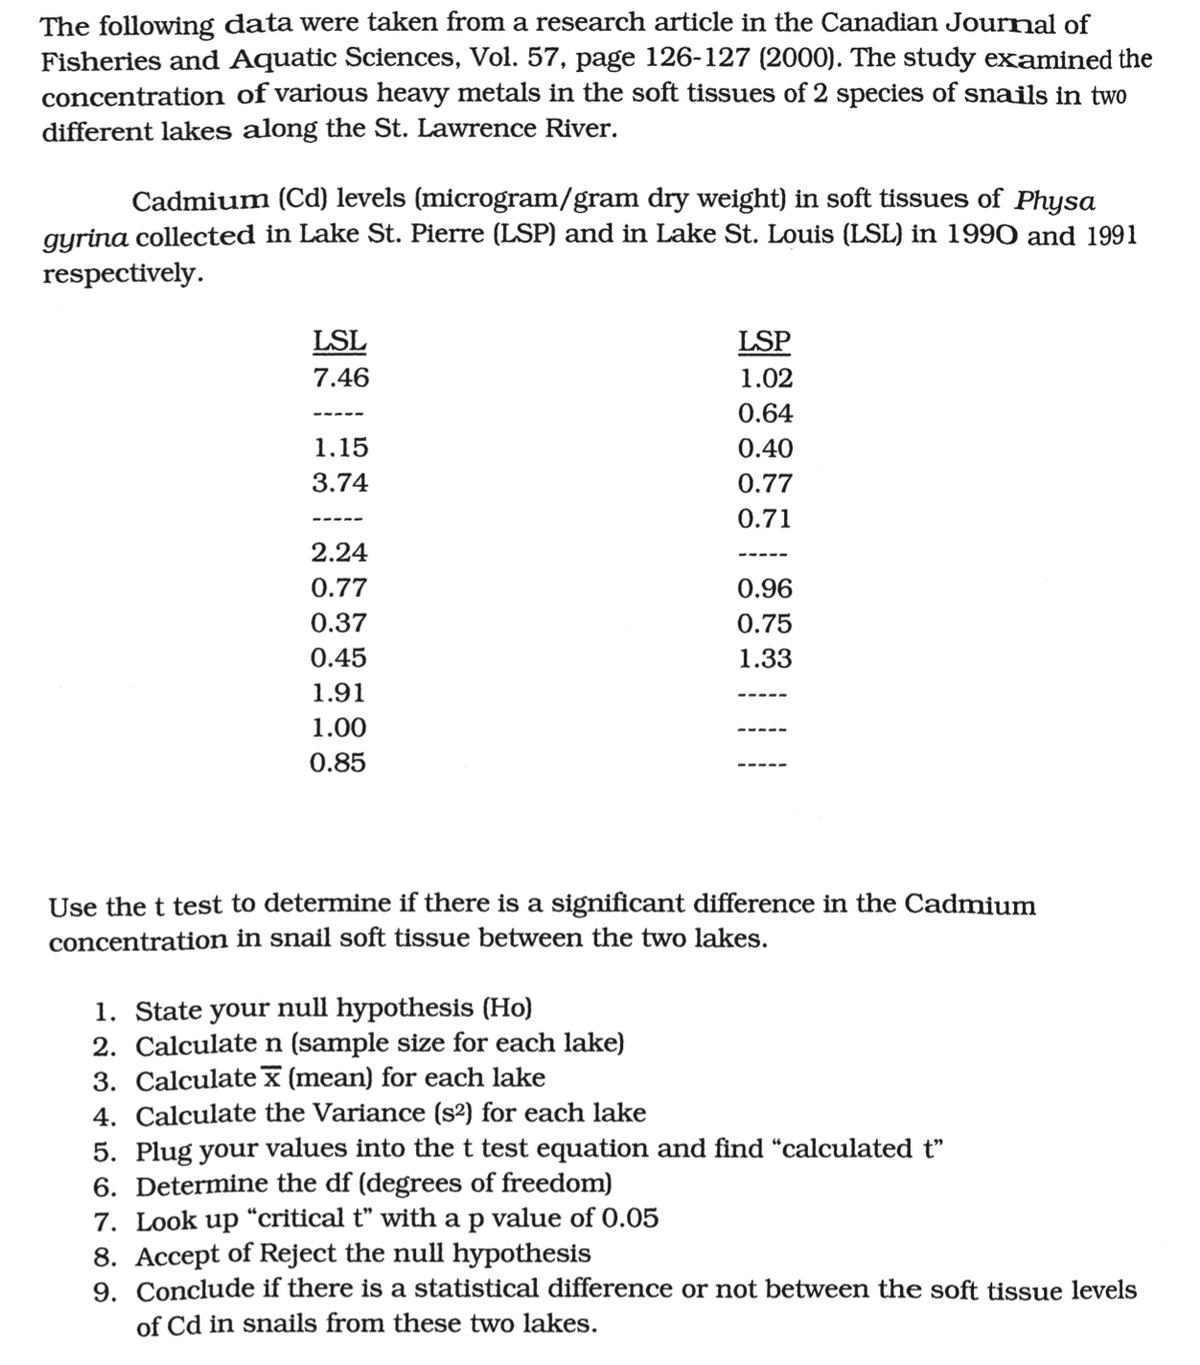 The following data were taken from a research article in the Canadian Journal of
Fisheries and Aquatic Sciences, Vol. 57, page 126-127 (2000). The study examined the
concentration of various heavy metals in the soft tissues of 2 species of snails in two
different lakes along the St. Lawrence River.
Cadmium (Cd) levels (microgram/gram dry weight) in soft tissues of Physa
gyrina collected in Lake St. Pierre (LSP) and in Lake St. Louis (LSL) in 1990 and 1991
respectively.
LSL
LSP
7.46
1.02
0.64
1.15
0.40
3.74
0.77
0.71
2.24
-----
0.77
0.96
0.37
0.75
0.45
1.33
1.91
1.00
0.85
Use the t test to determine if there is a significant difference in the Cadmium
concentration in snail soft tissue between the two lakes.
1. State your null hypothesis (Ho)
2. Calculaten (sample size for each lake)
3. Calculatex(mean) for each lake
4. Calculate the Variance (s²) for each lake
5. Plug your values into the t test equation and find "calculated t"
6. Determine the df (degrees of freedom)
7. Look up “critical t" with a p value of 0.05
8. Accept of Reject the null hypothesis
9. Conclude if there is a statistical difference or not between the soft tissue levels
of Cd in snails from these two lakes.
